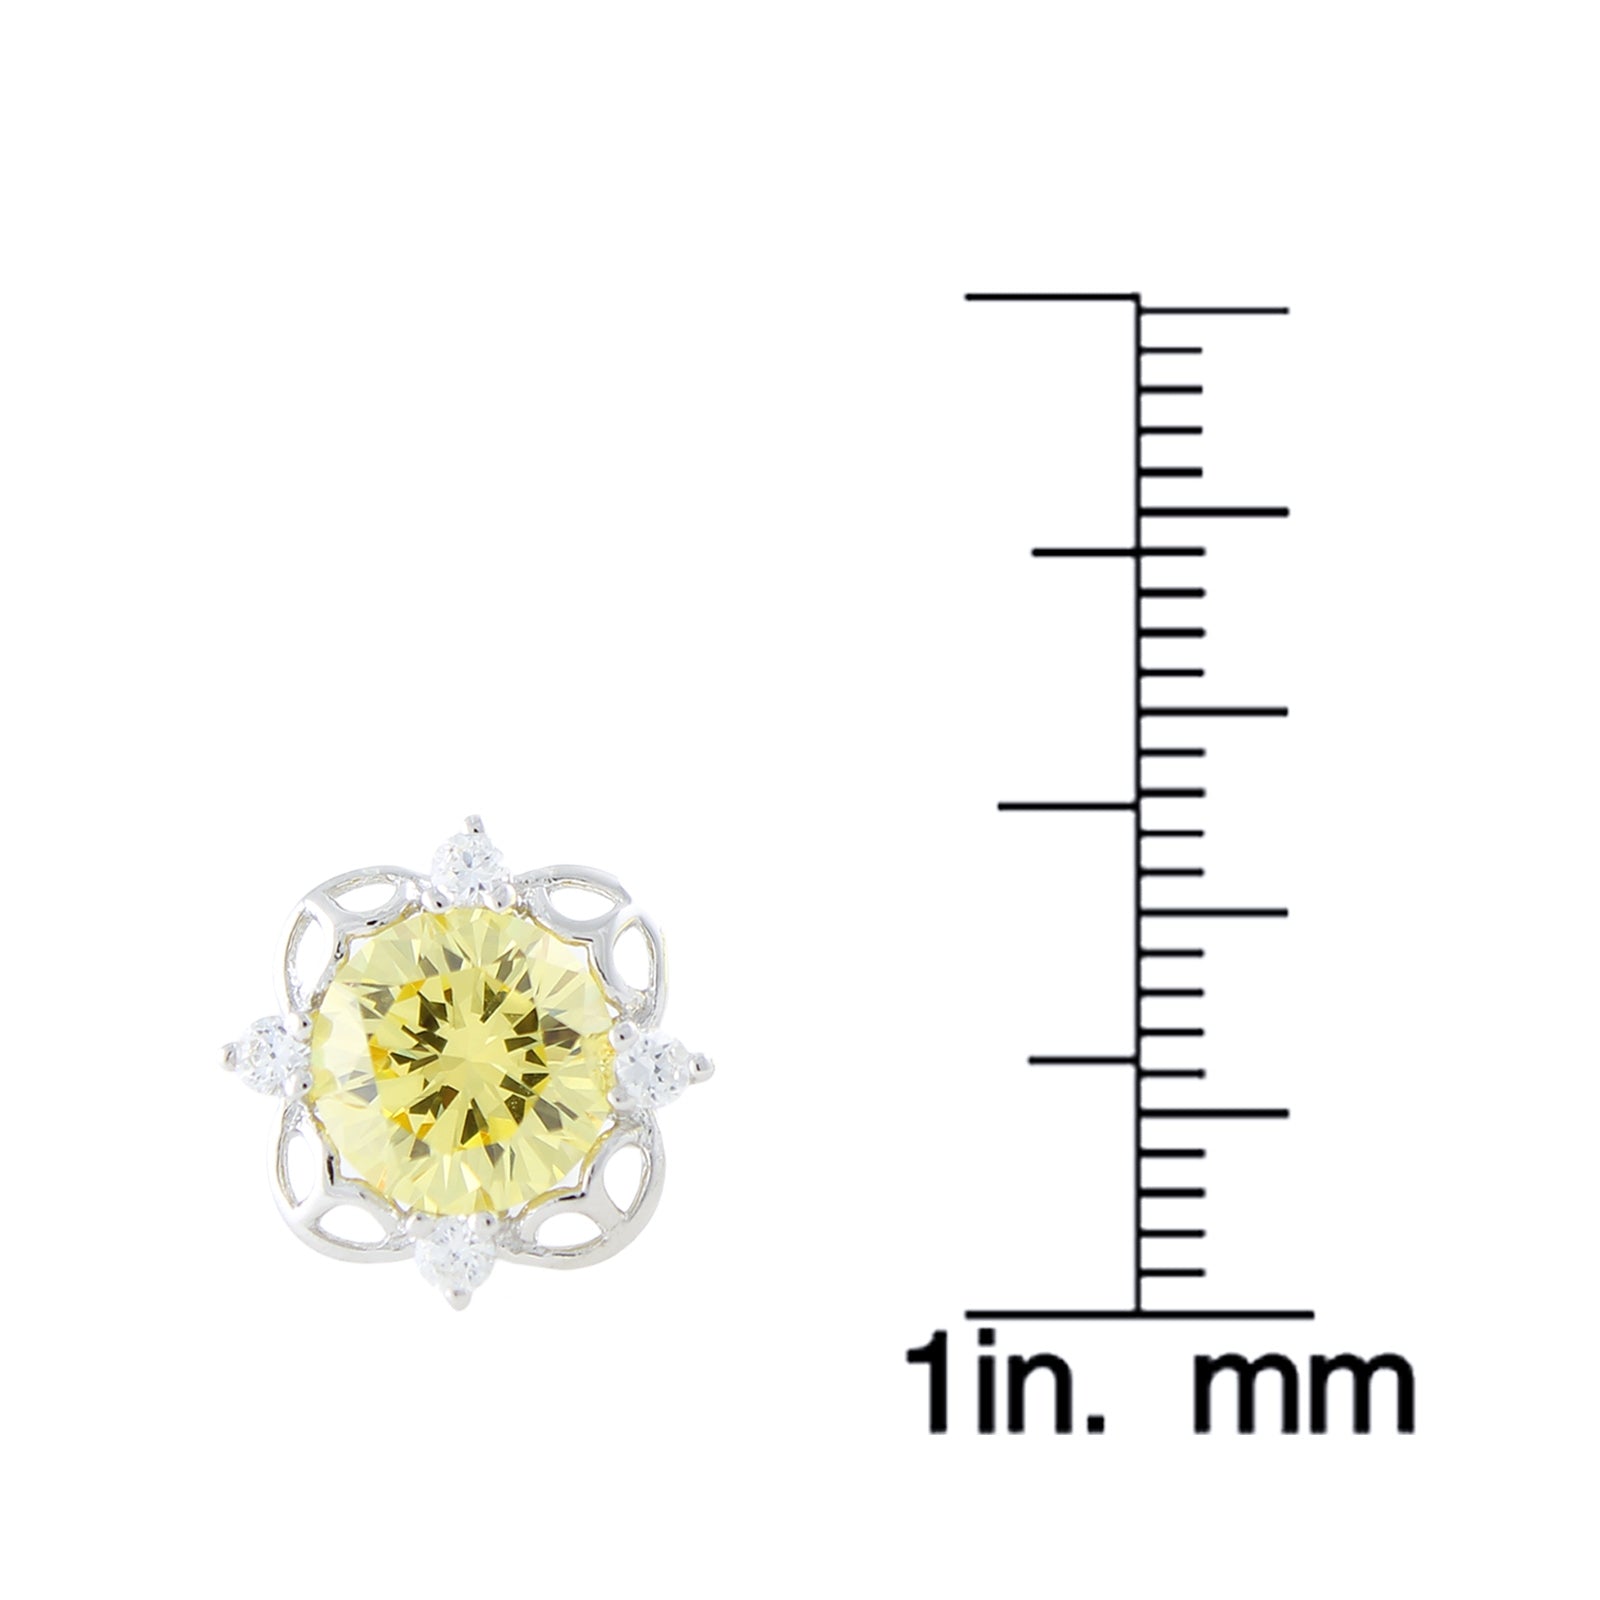 Pinctore Sterling Silver 4.86ctw Yellow Color CZ Studs Earring 0.37'L - pinctore